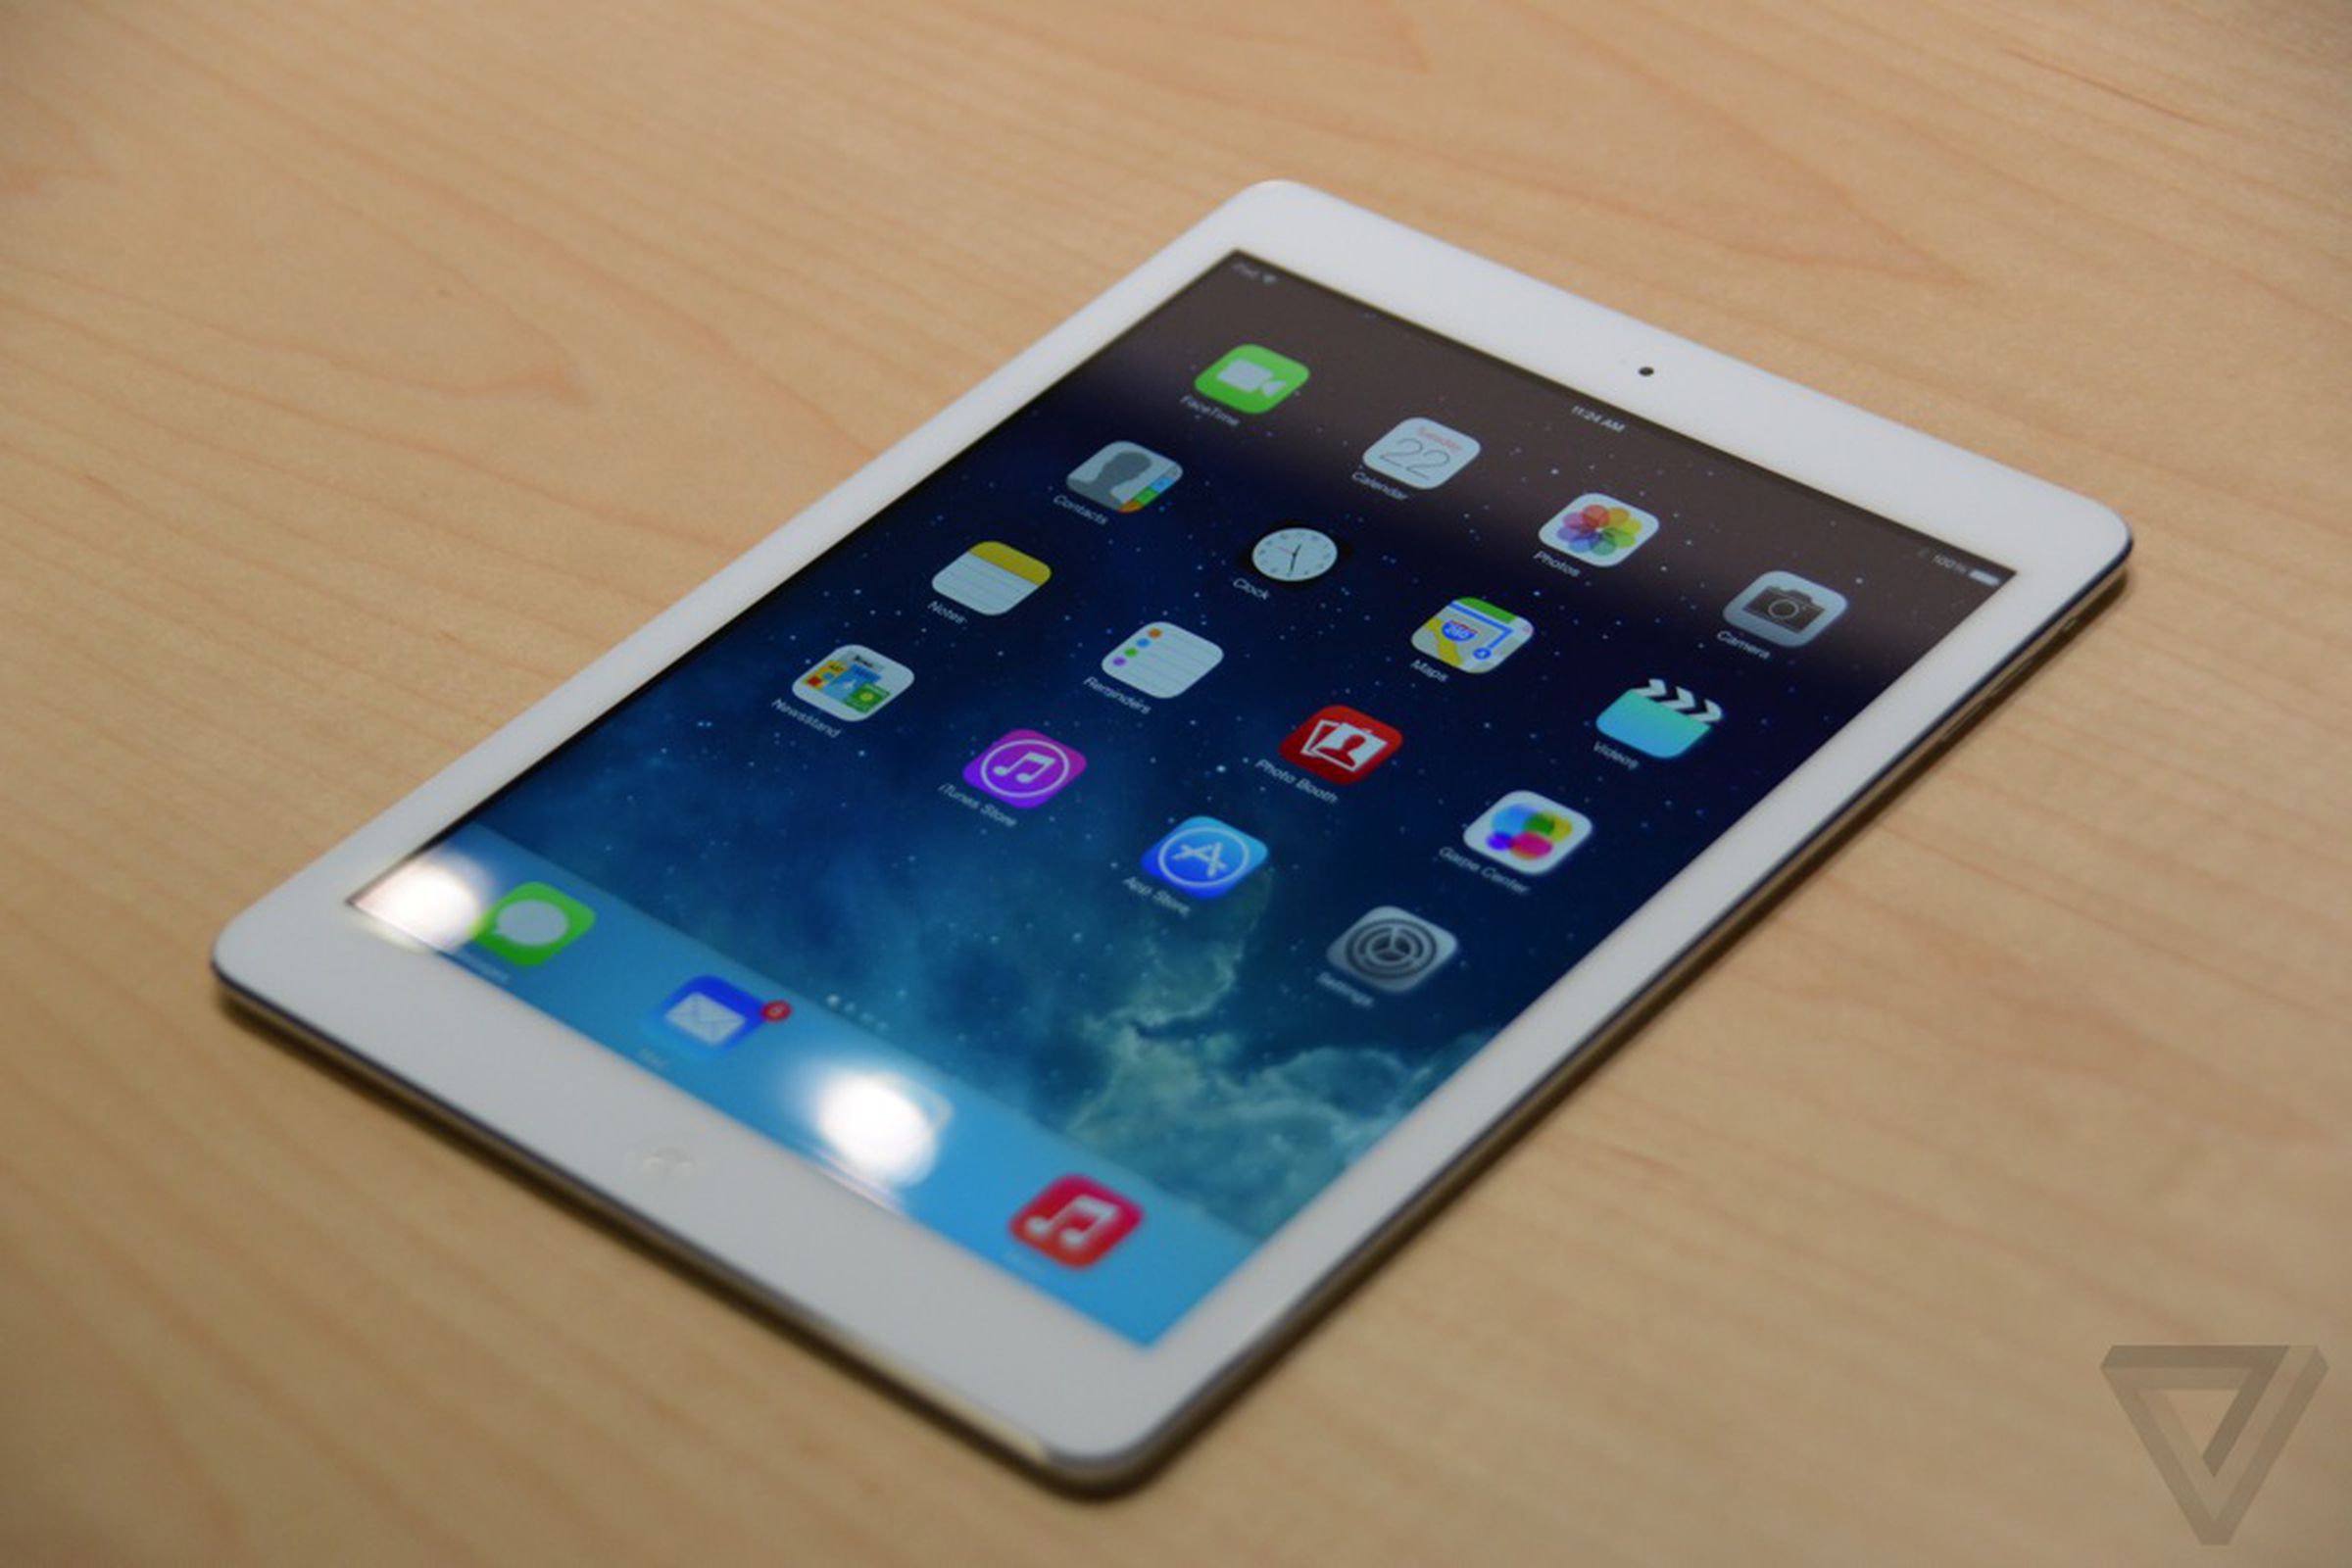 iPad Air hands-on picture